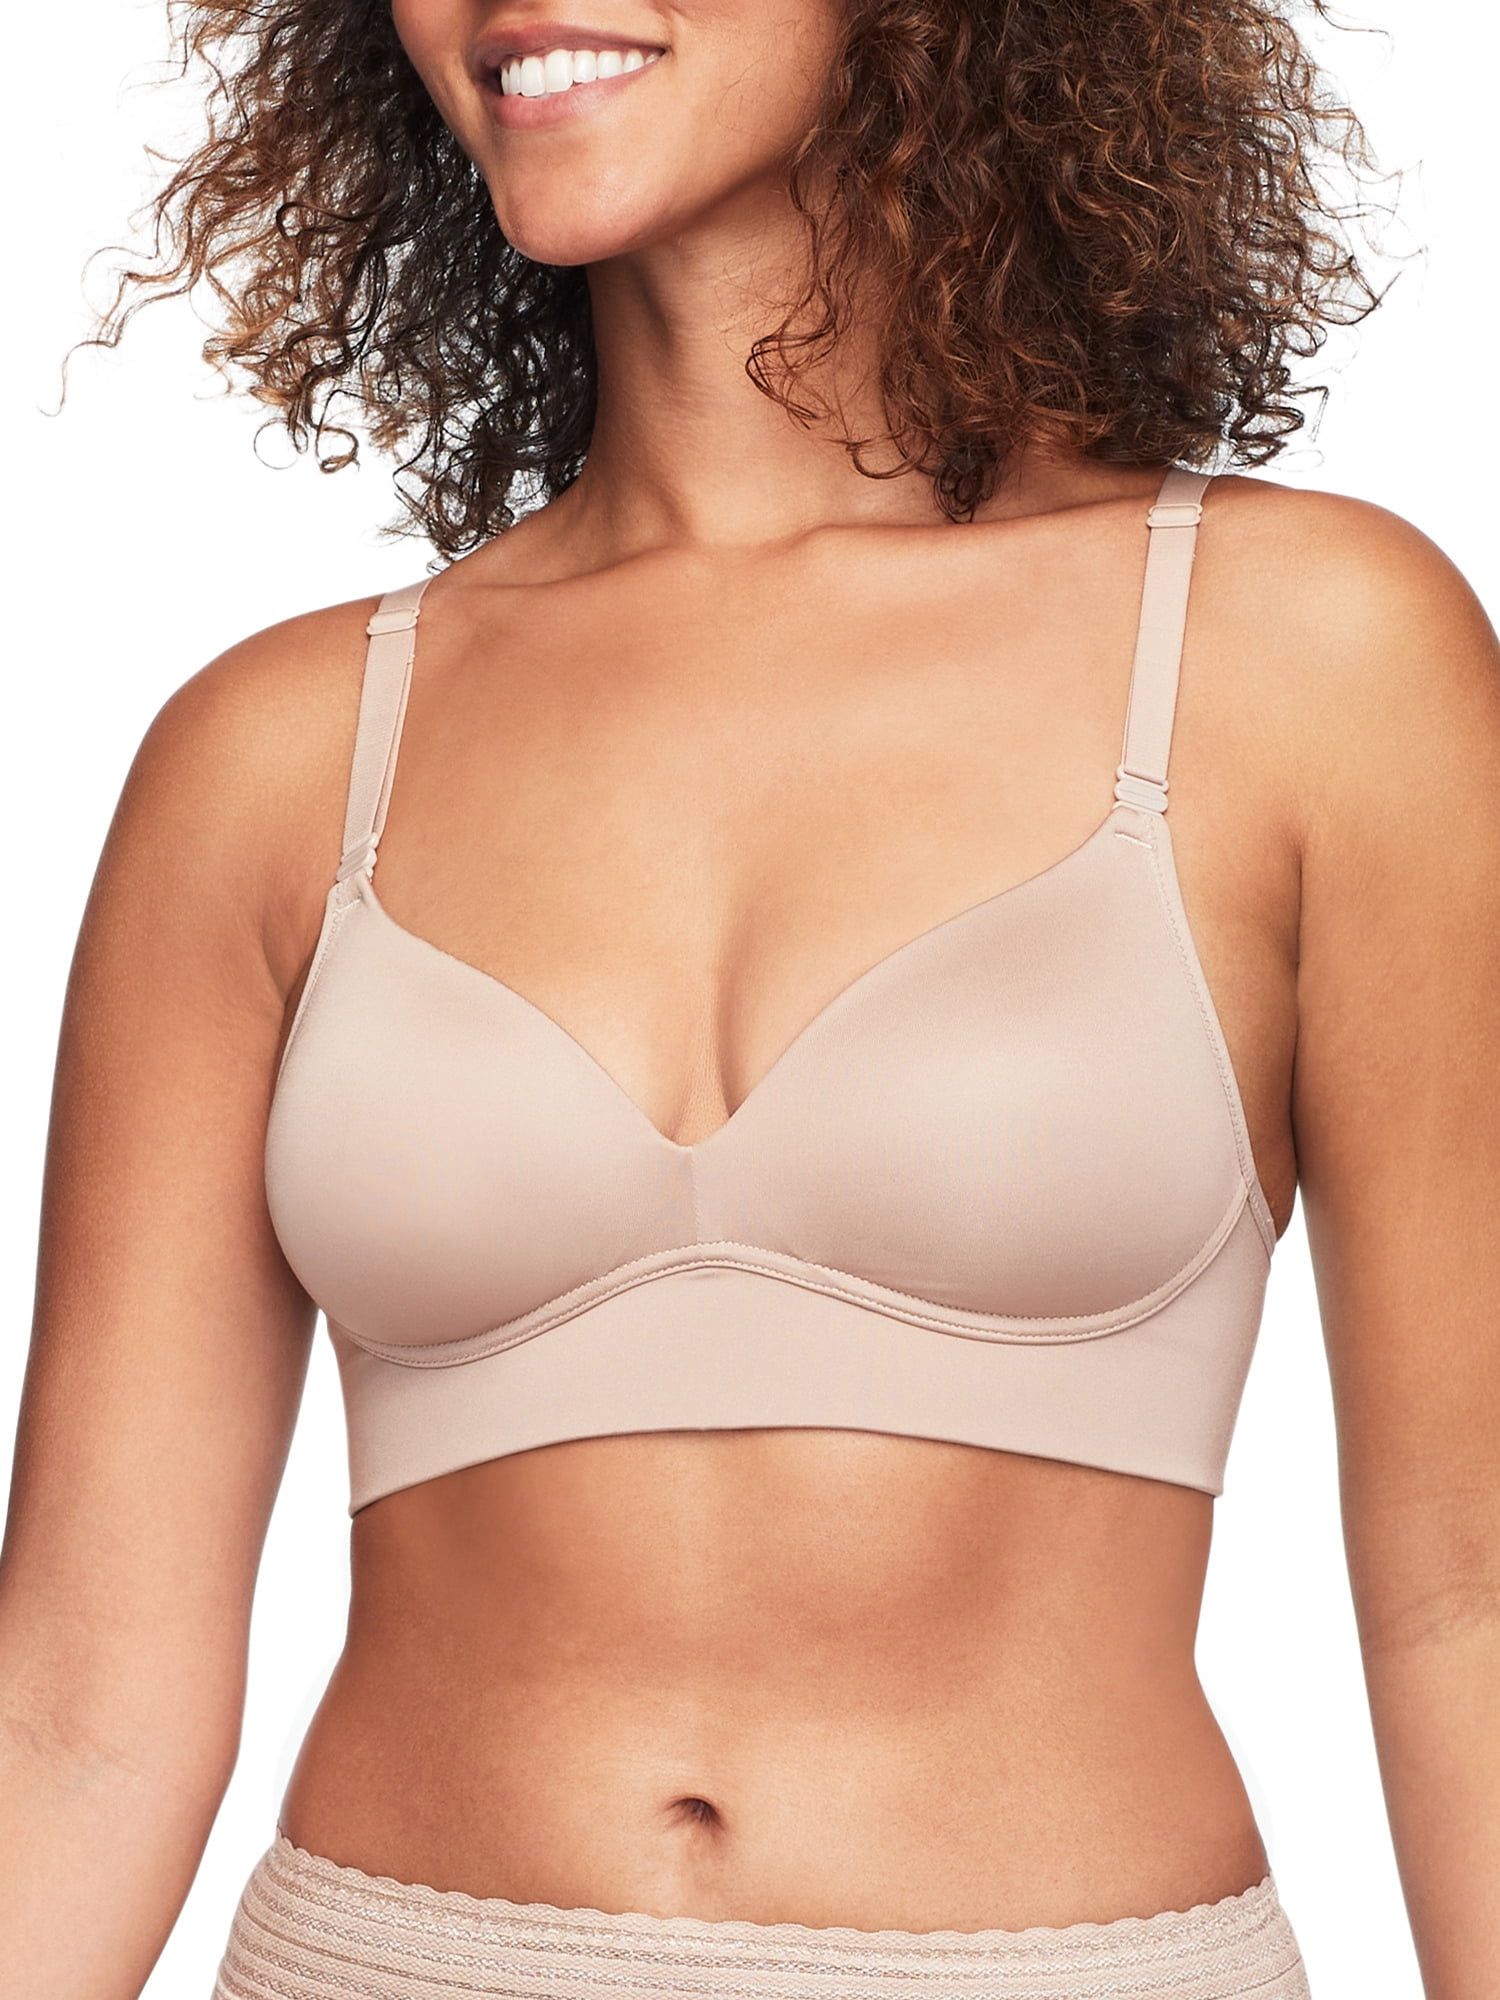 Simply Perfect by Warner's Women's Longline Convertible Wirefree Bra -  Berry 34B